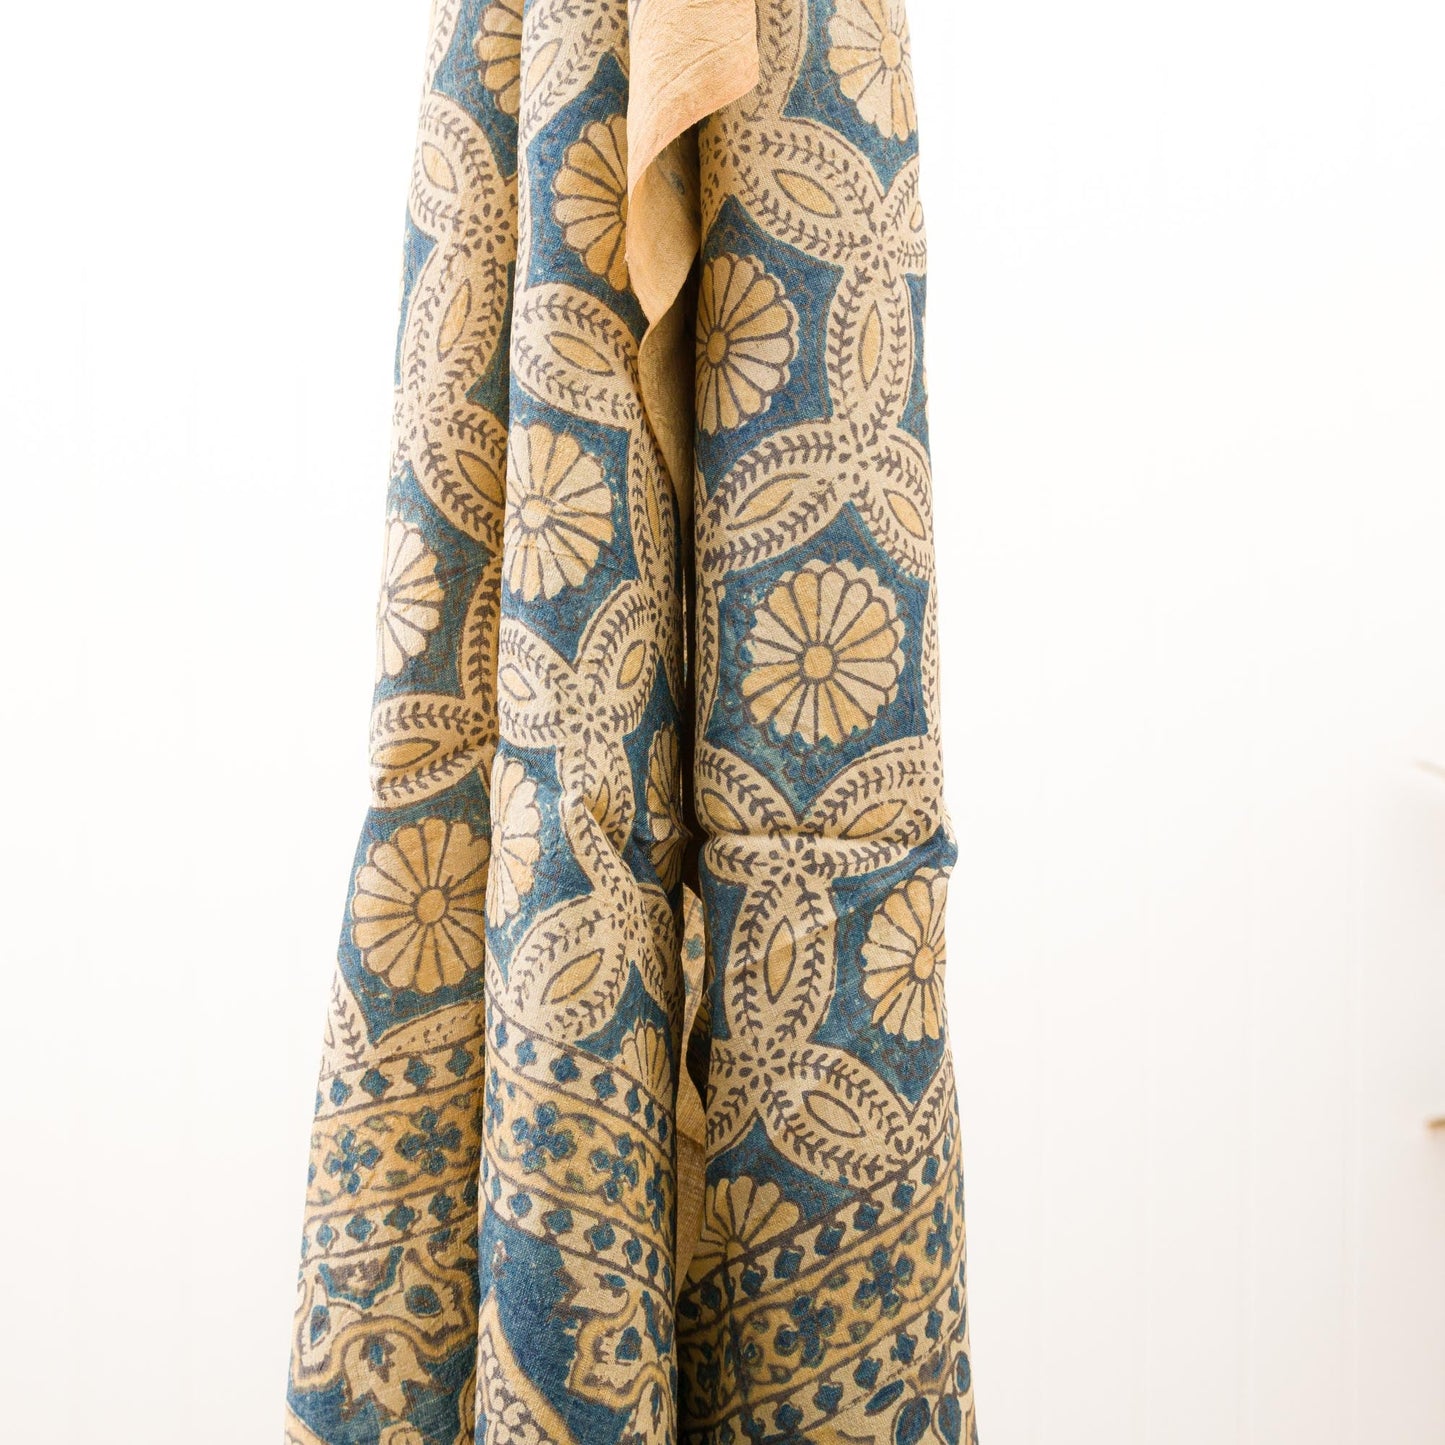 Dhavdi Flower Wild Silk Natural Dye Scarf Gifts, Scarves -xo